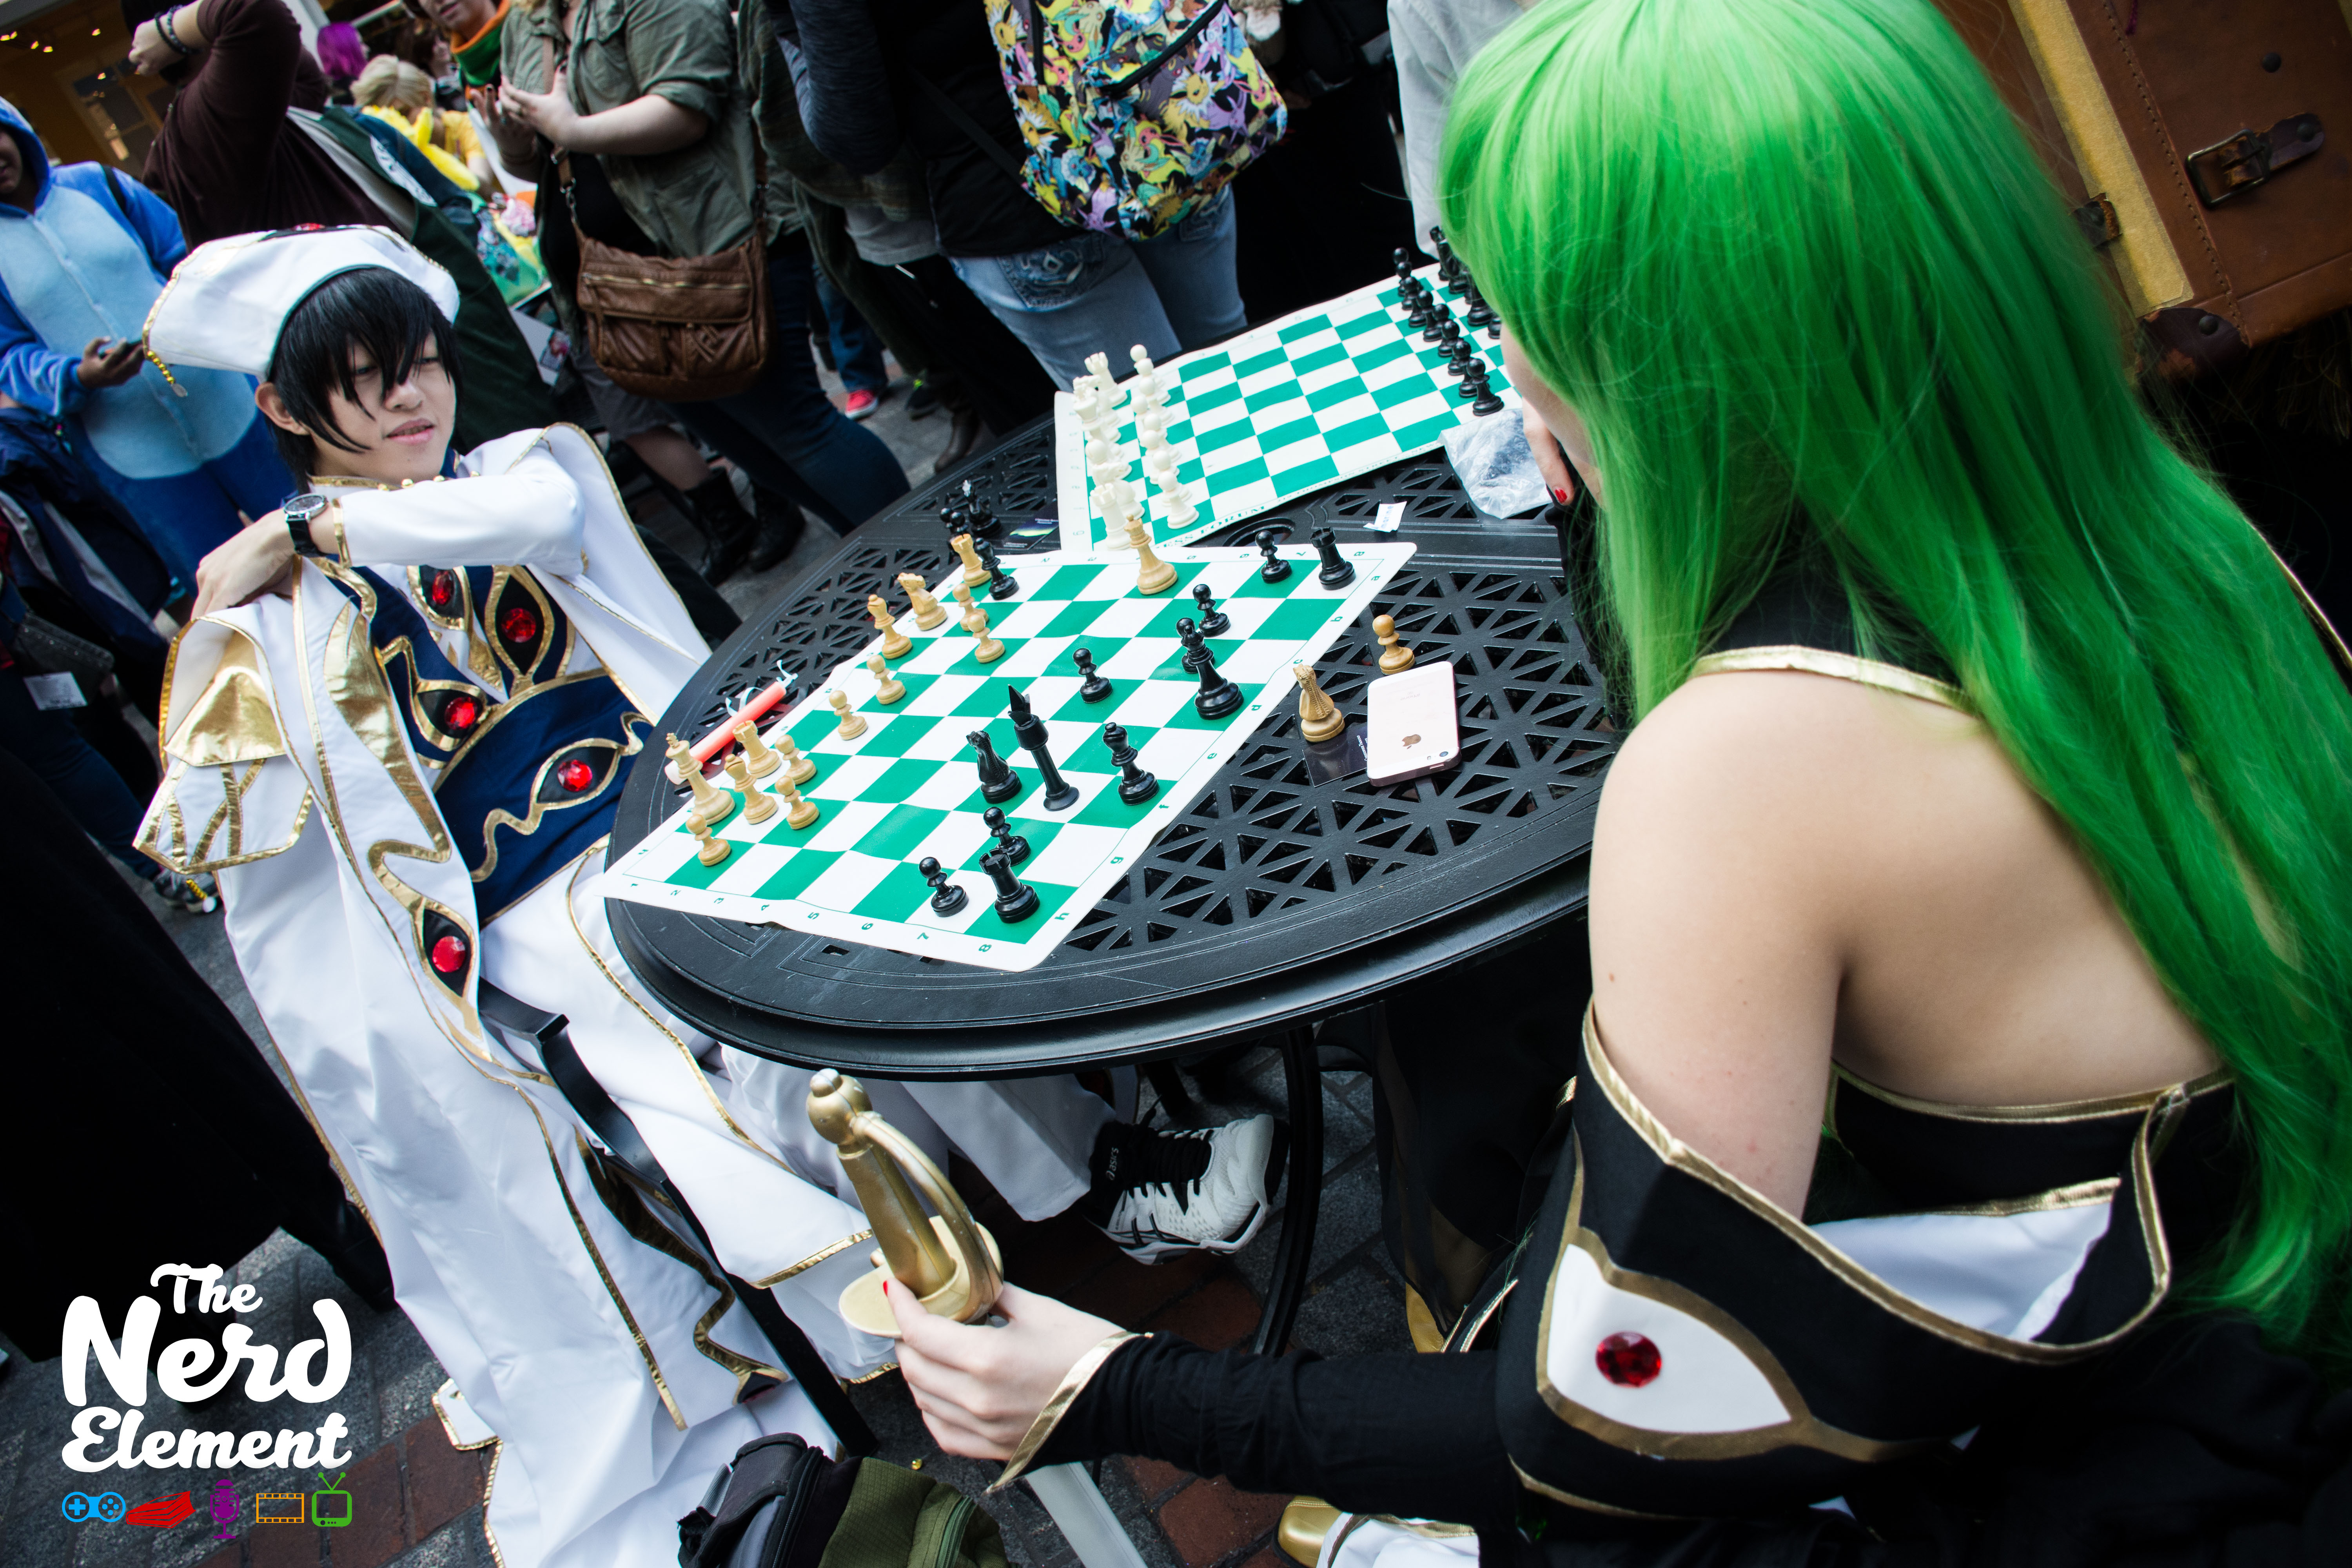 Emperor Lelouch and CC - Code Geass
Cosplayers unknown